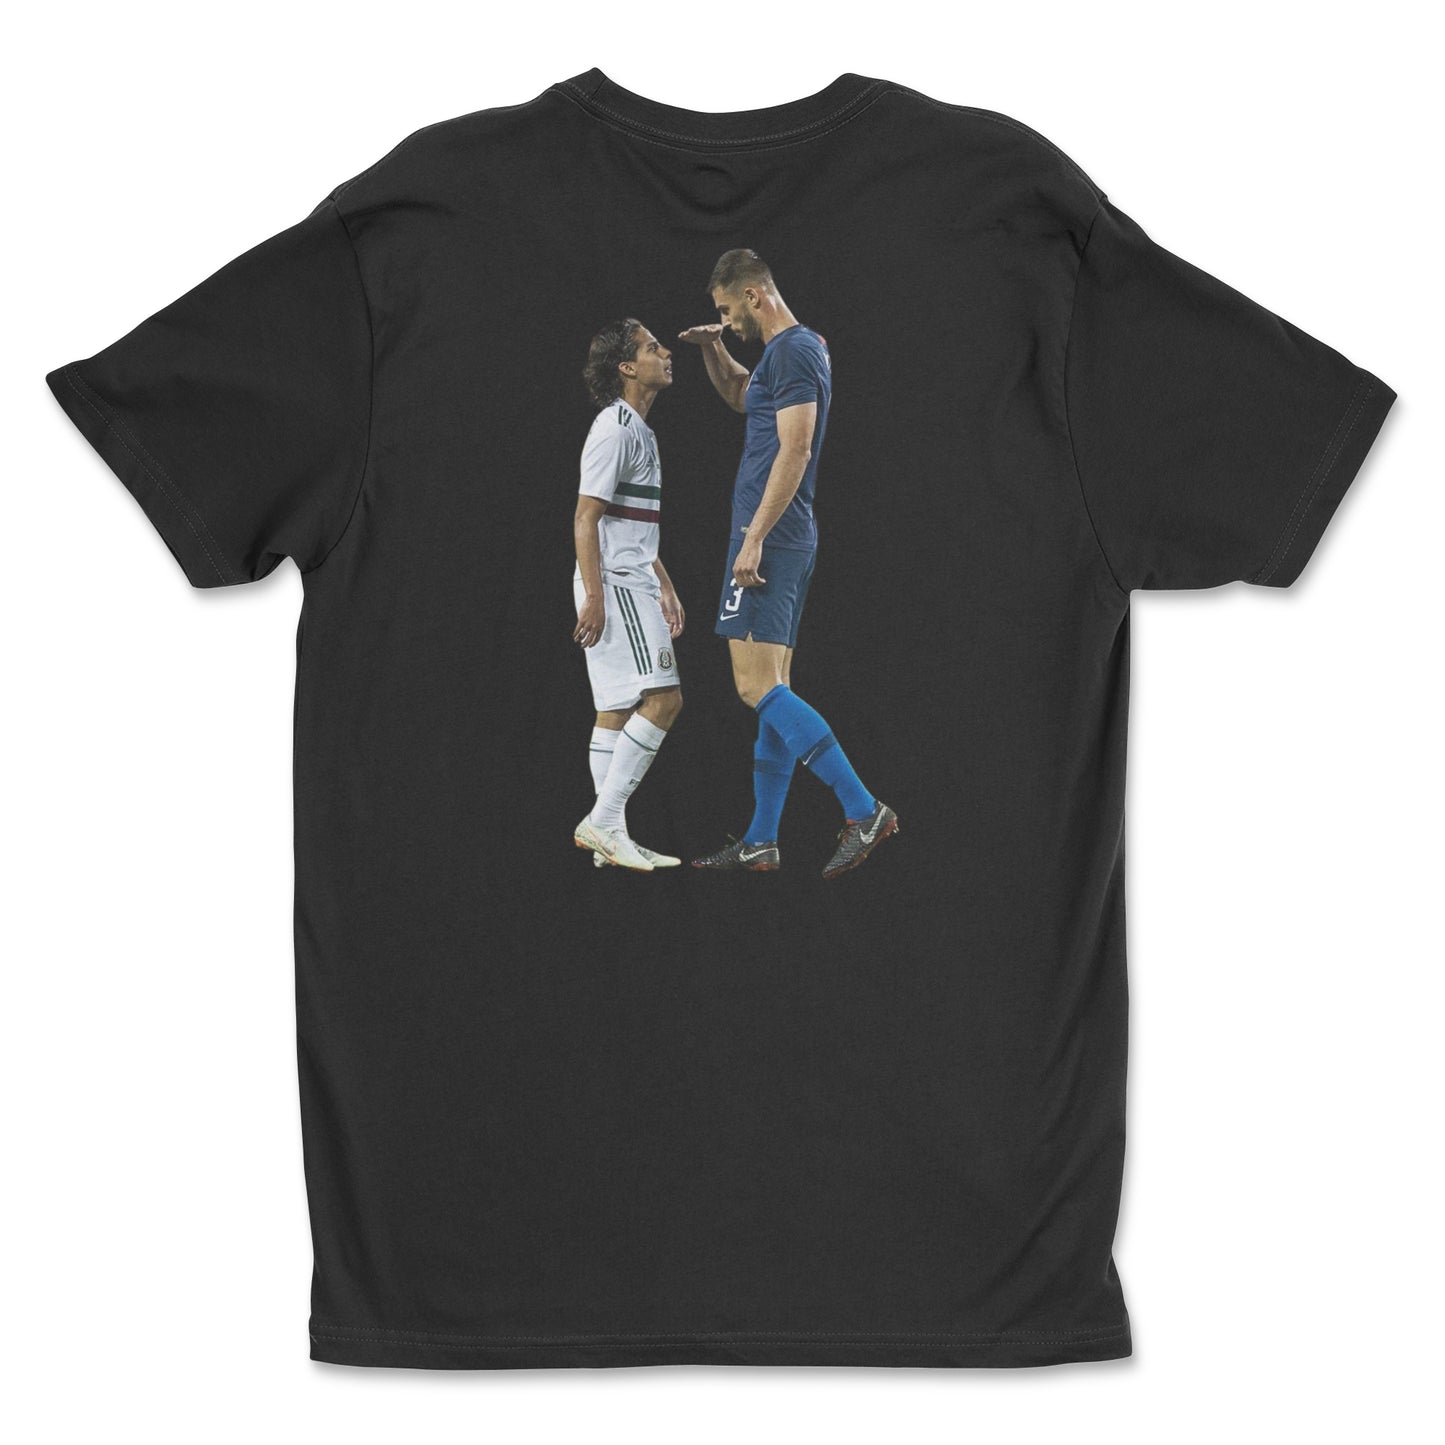 black t-shirt with miazga lainez picture - the height of rivalry